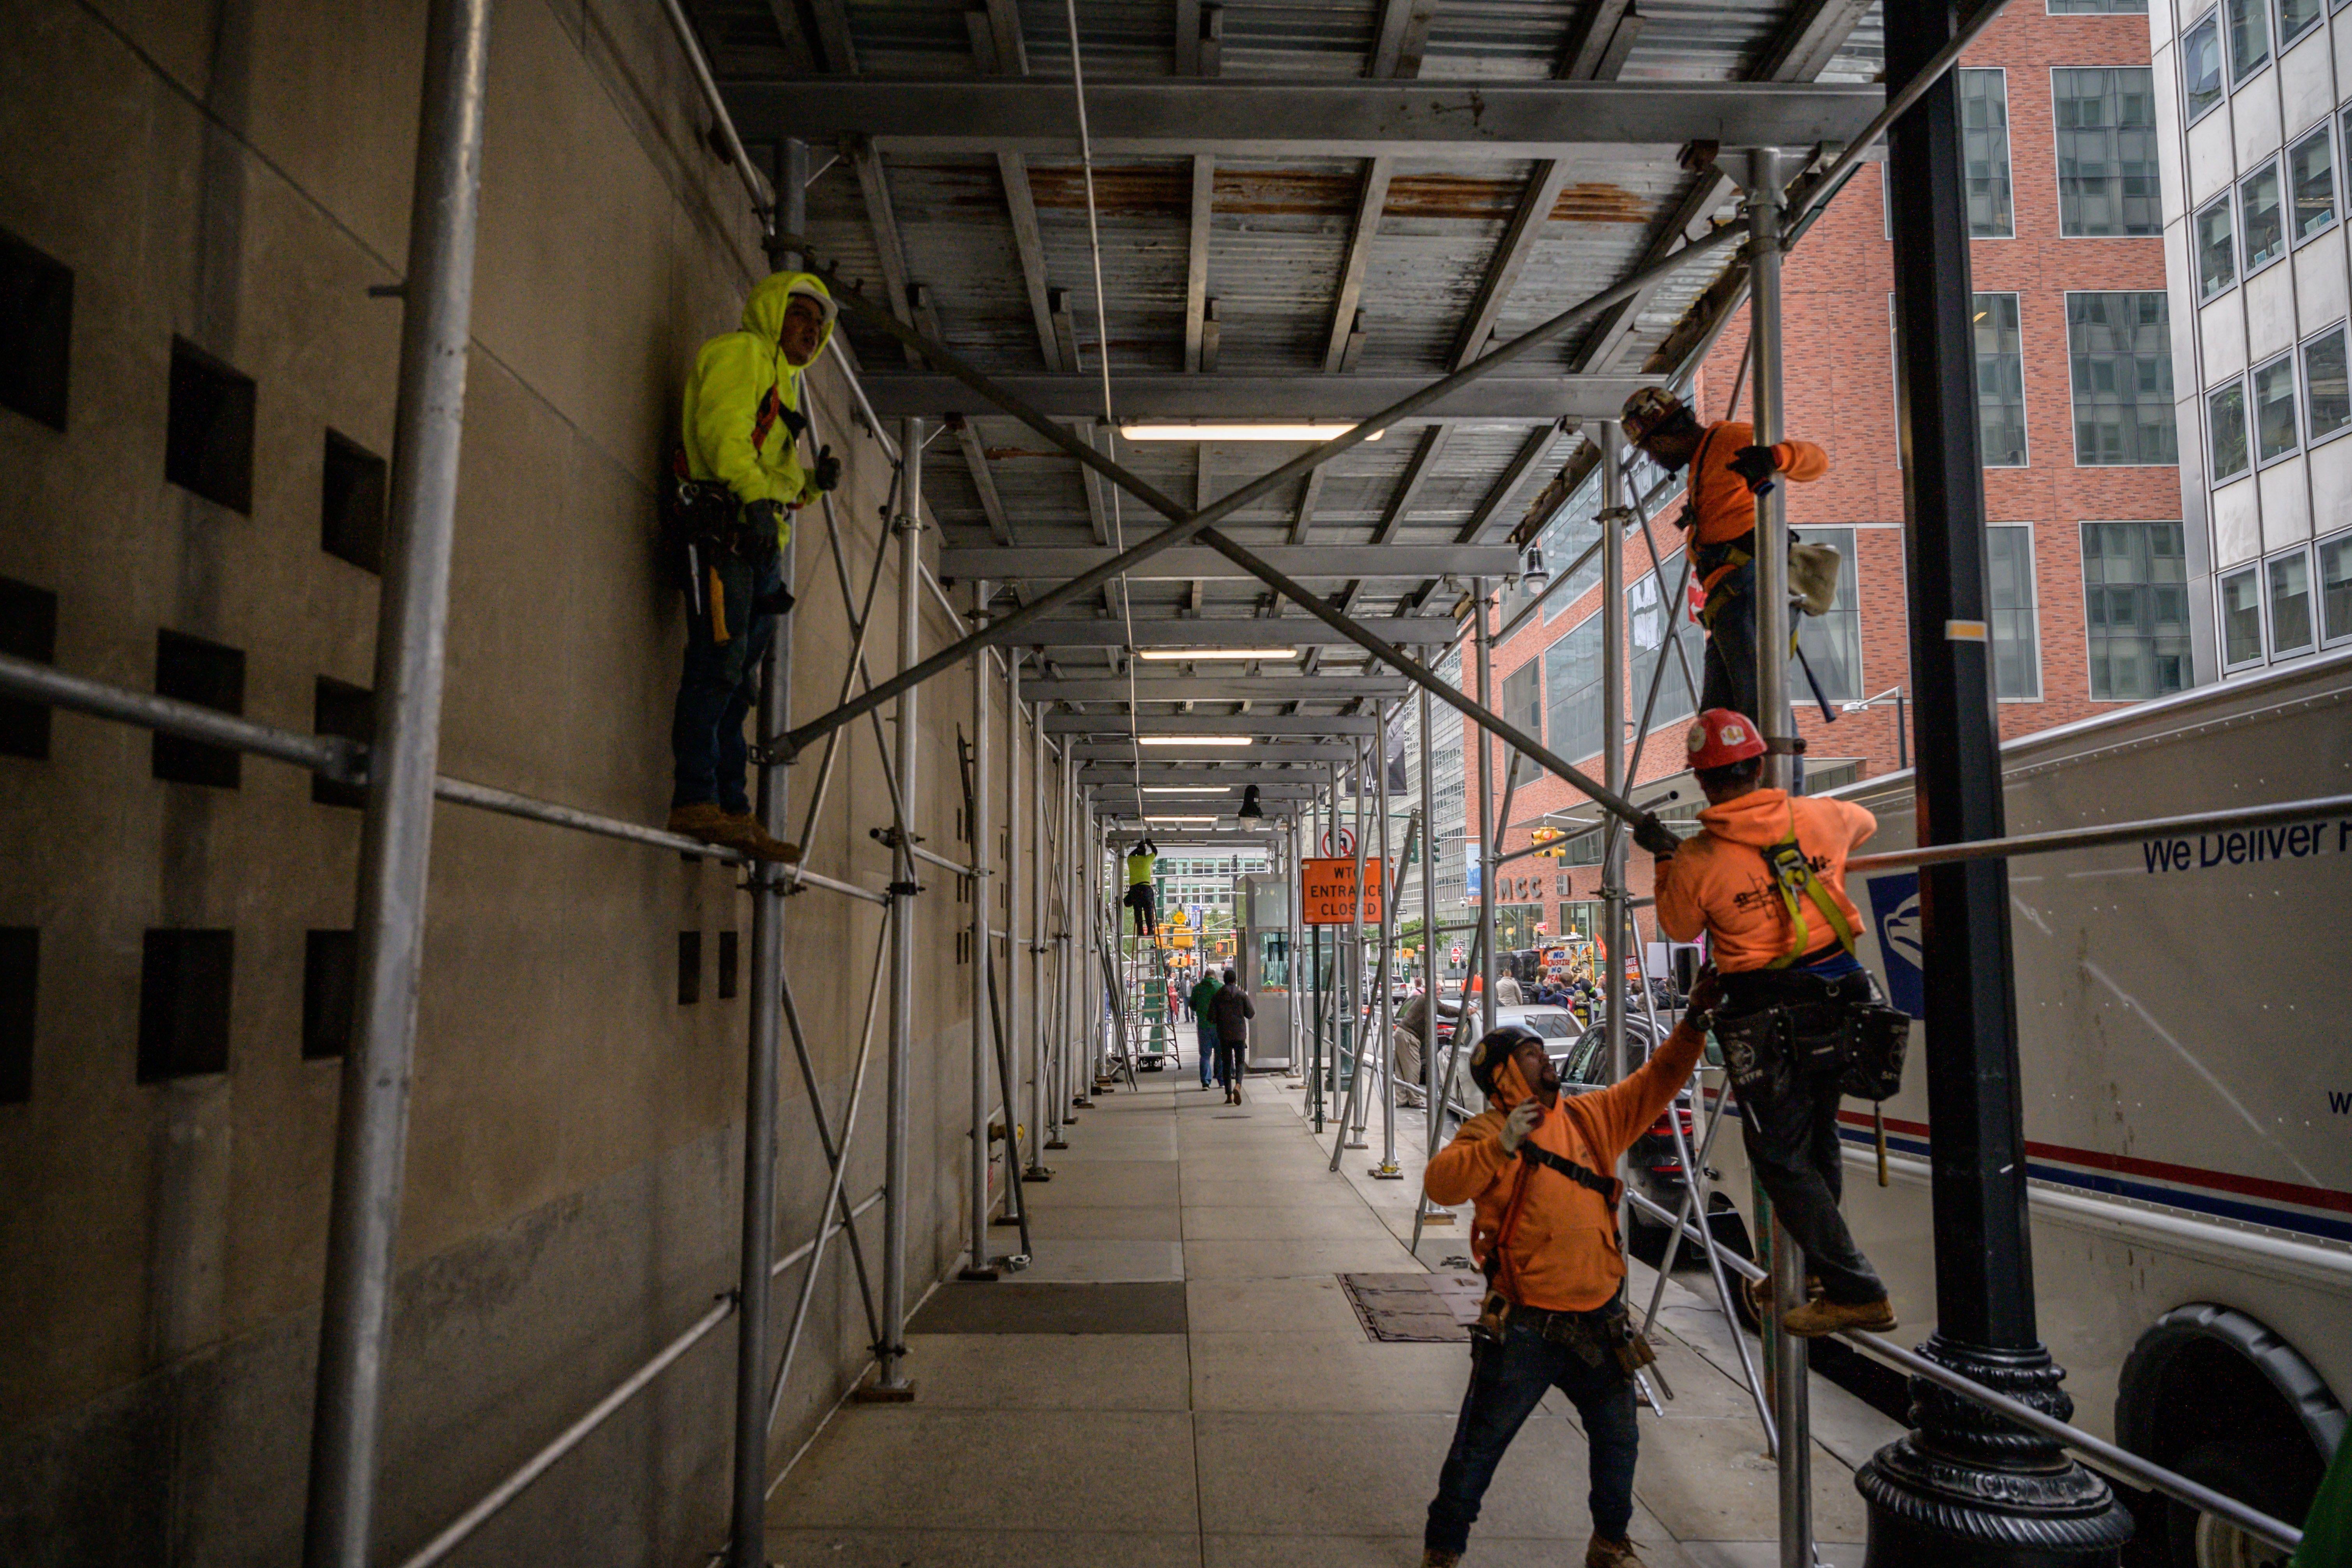 Construction workers erect scaffolding on a street in Manhattan, New York city on October 29, 2021.